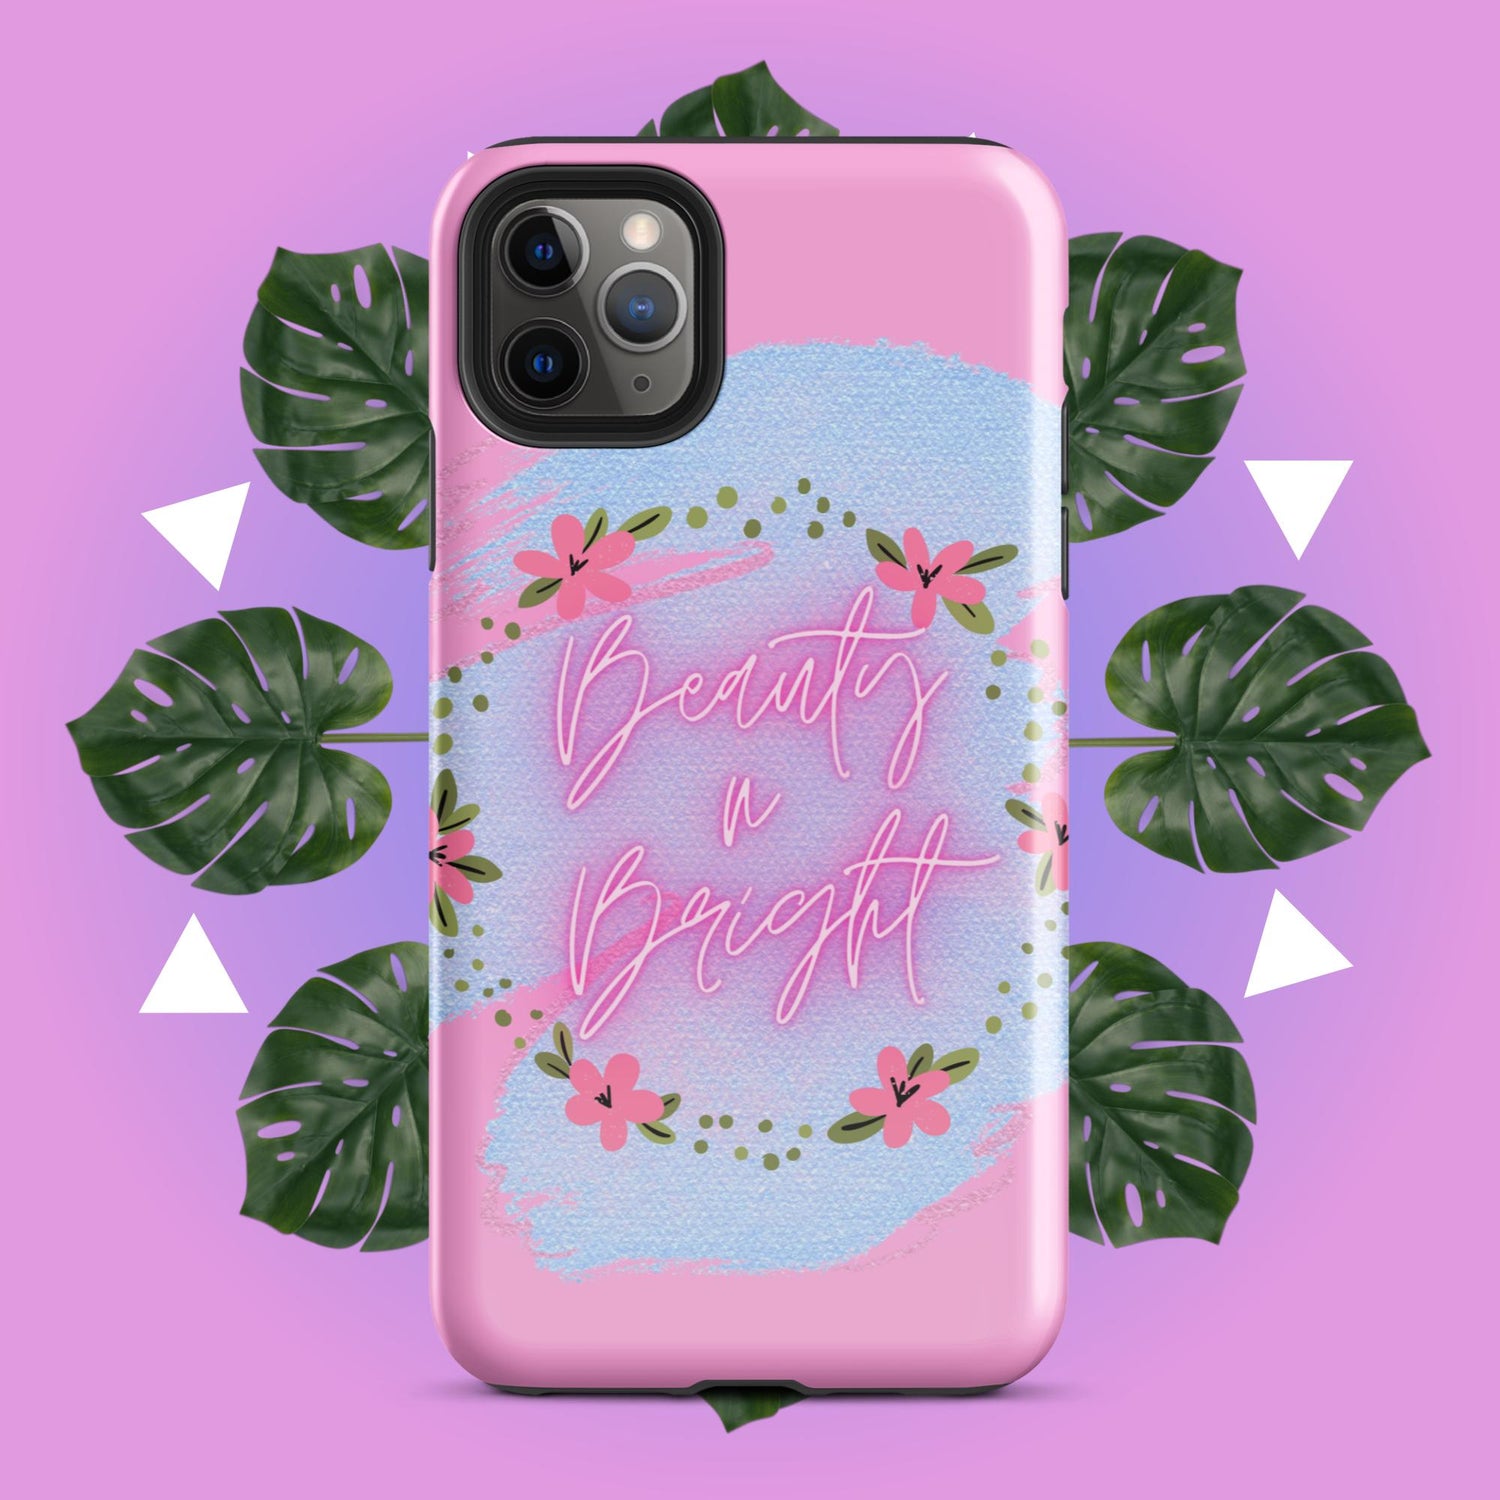 Beauty n Bright - Iphone Case